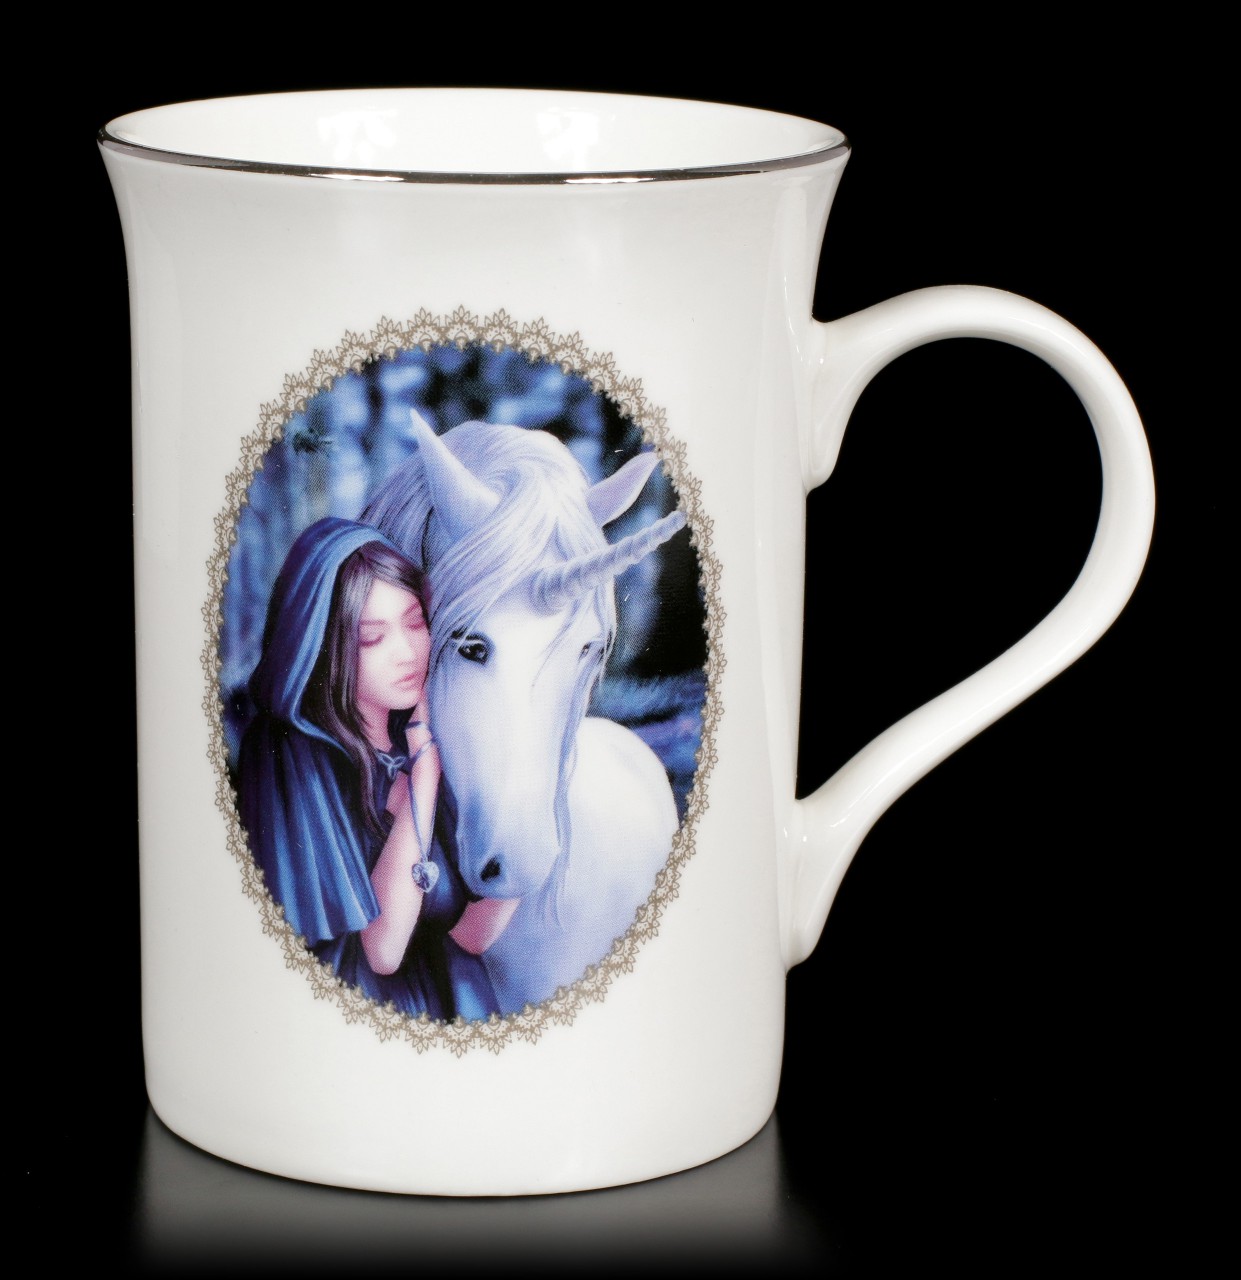 Mug with Unicorn - Solace by Anne Stokes